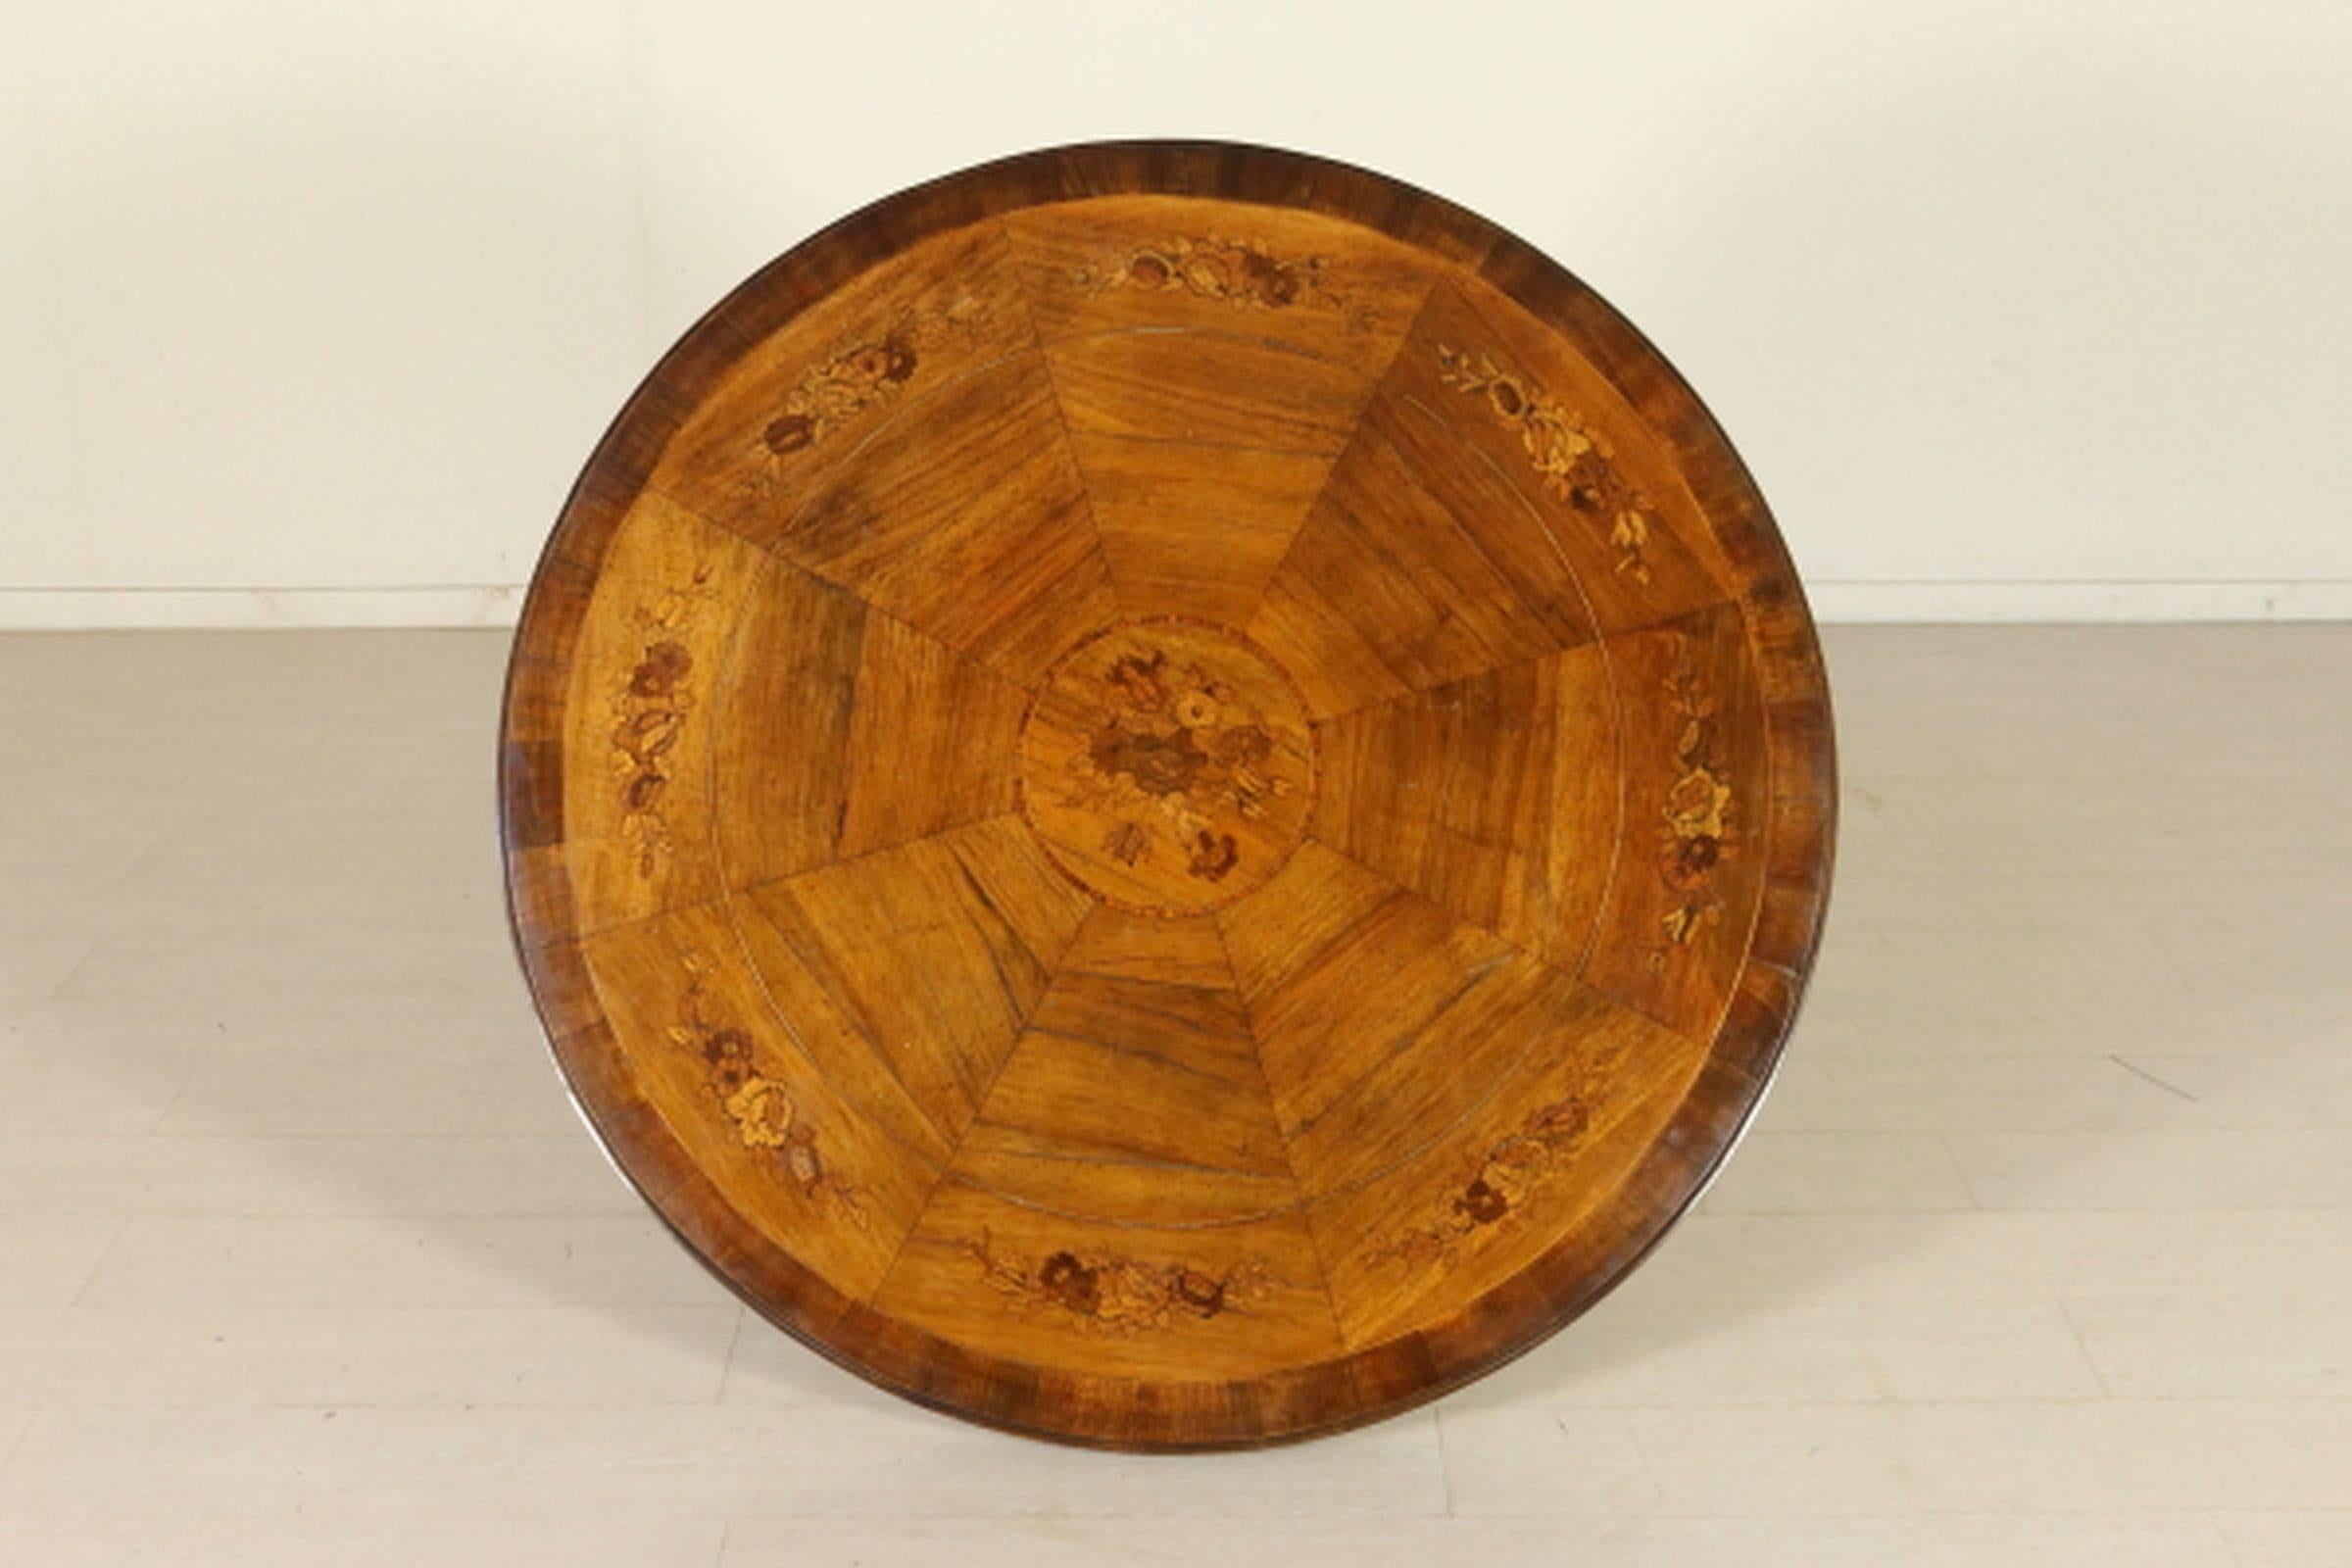 Circular marquetry top centered by an inlaid medallion raised on a tapered inlaid standard resting on a tripartite plinth base ending in bun feet.